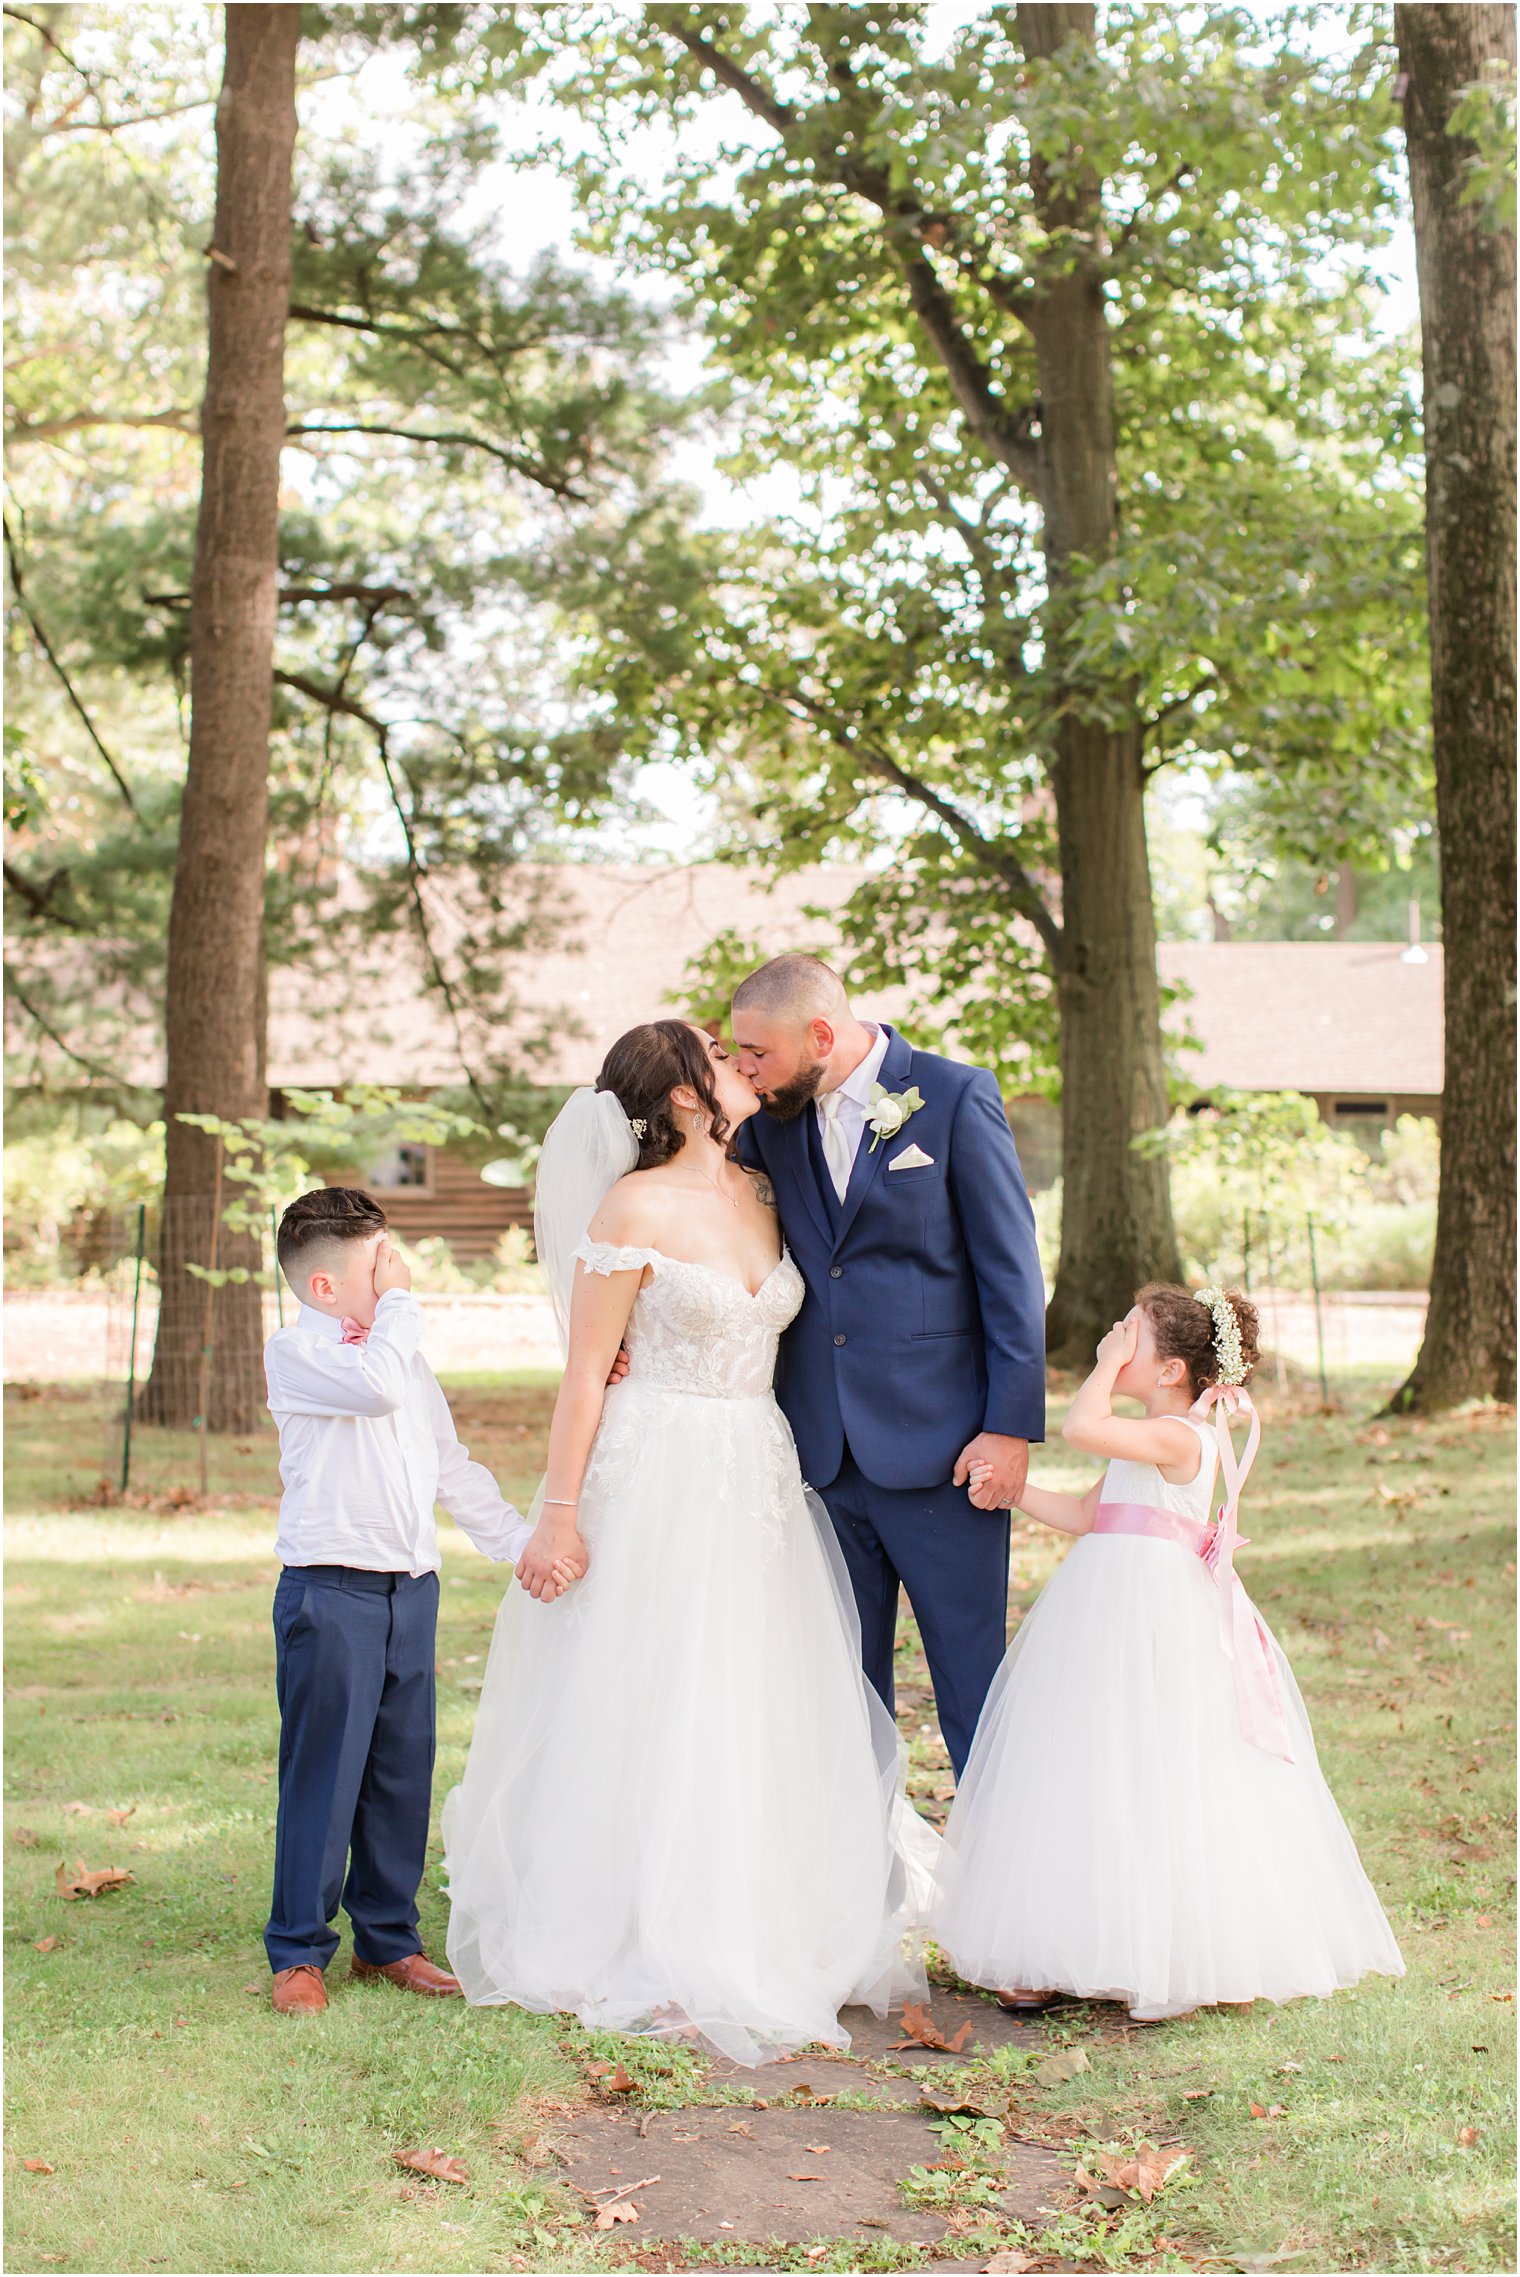 kids cover eyes while parents kiss on wedding day at Rutgers Gardens